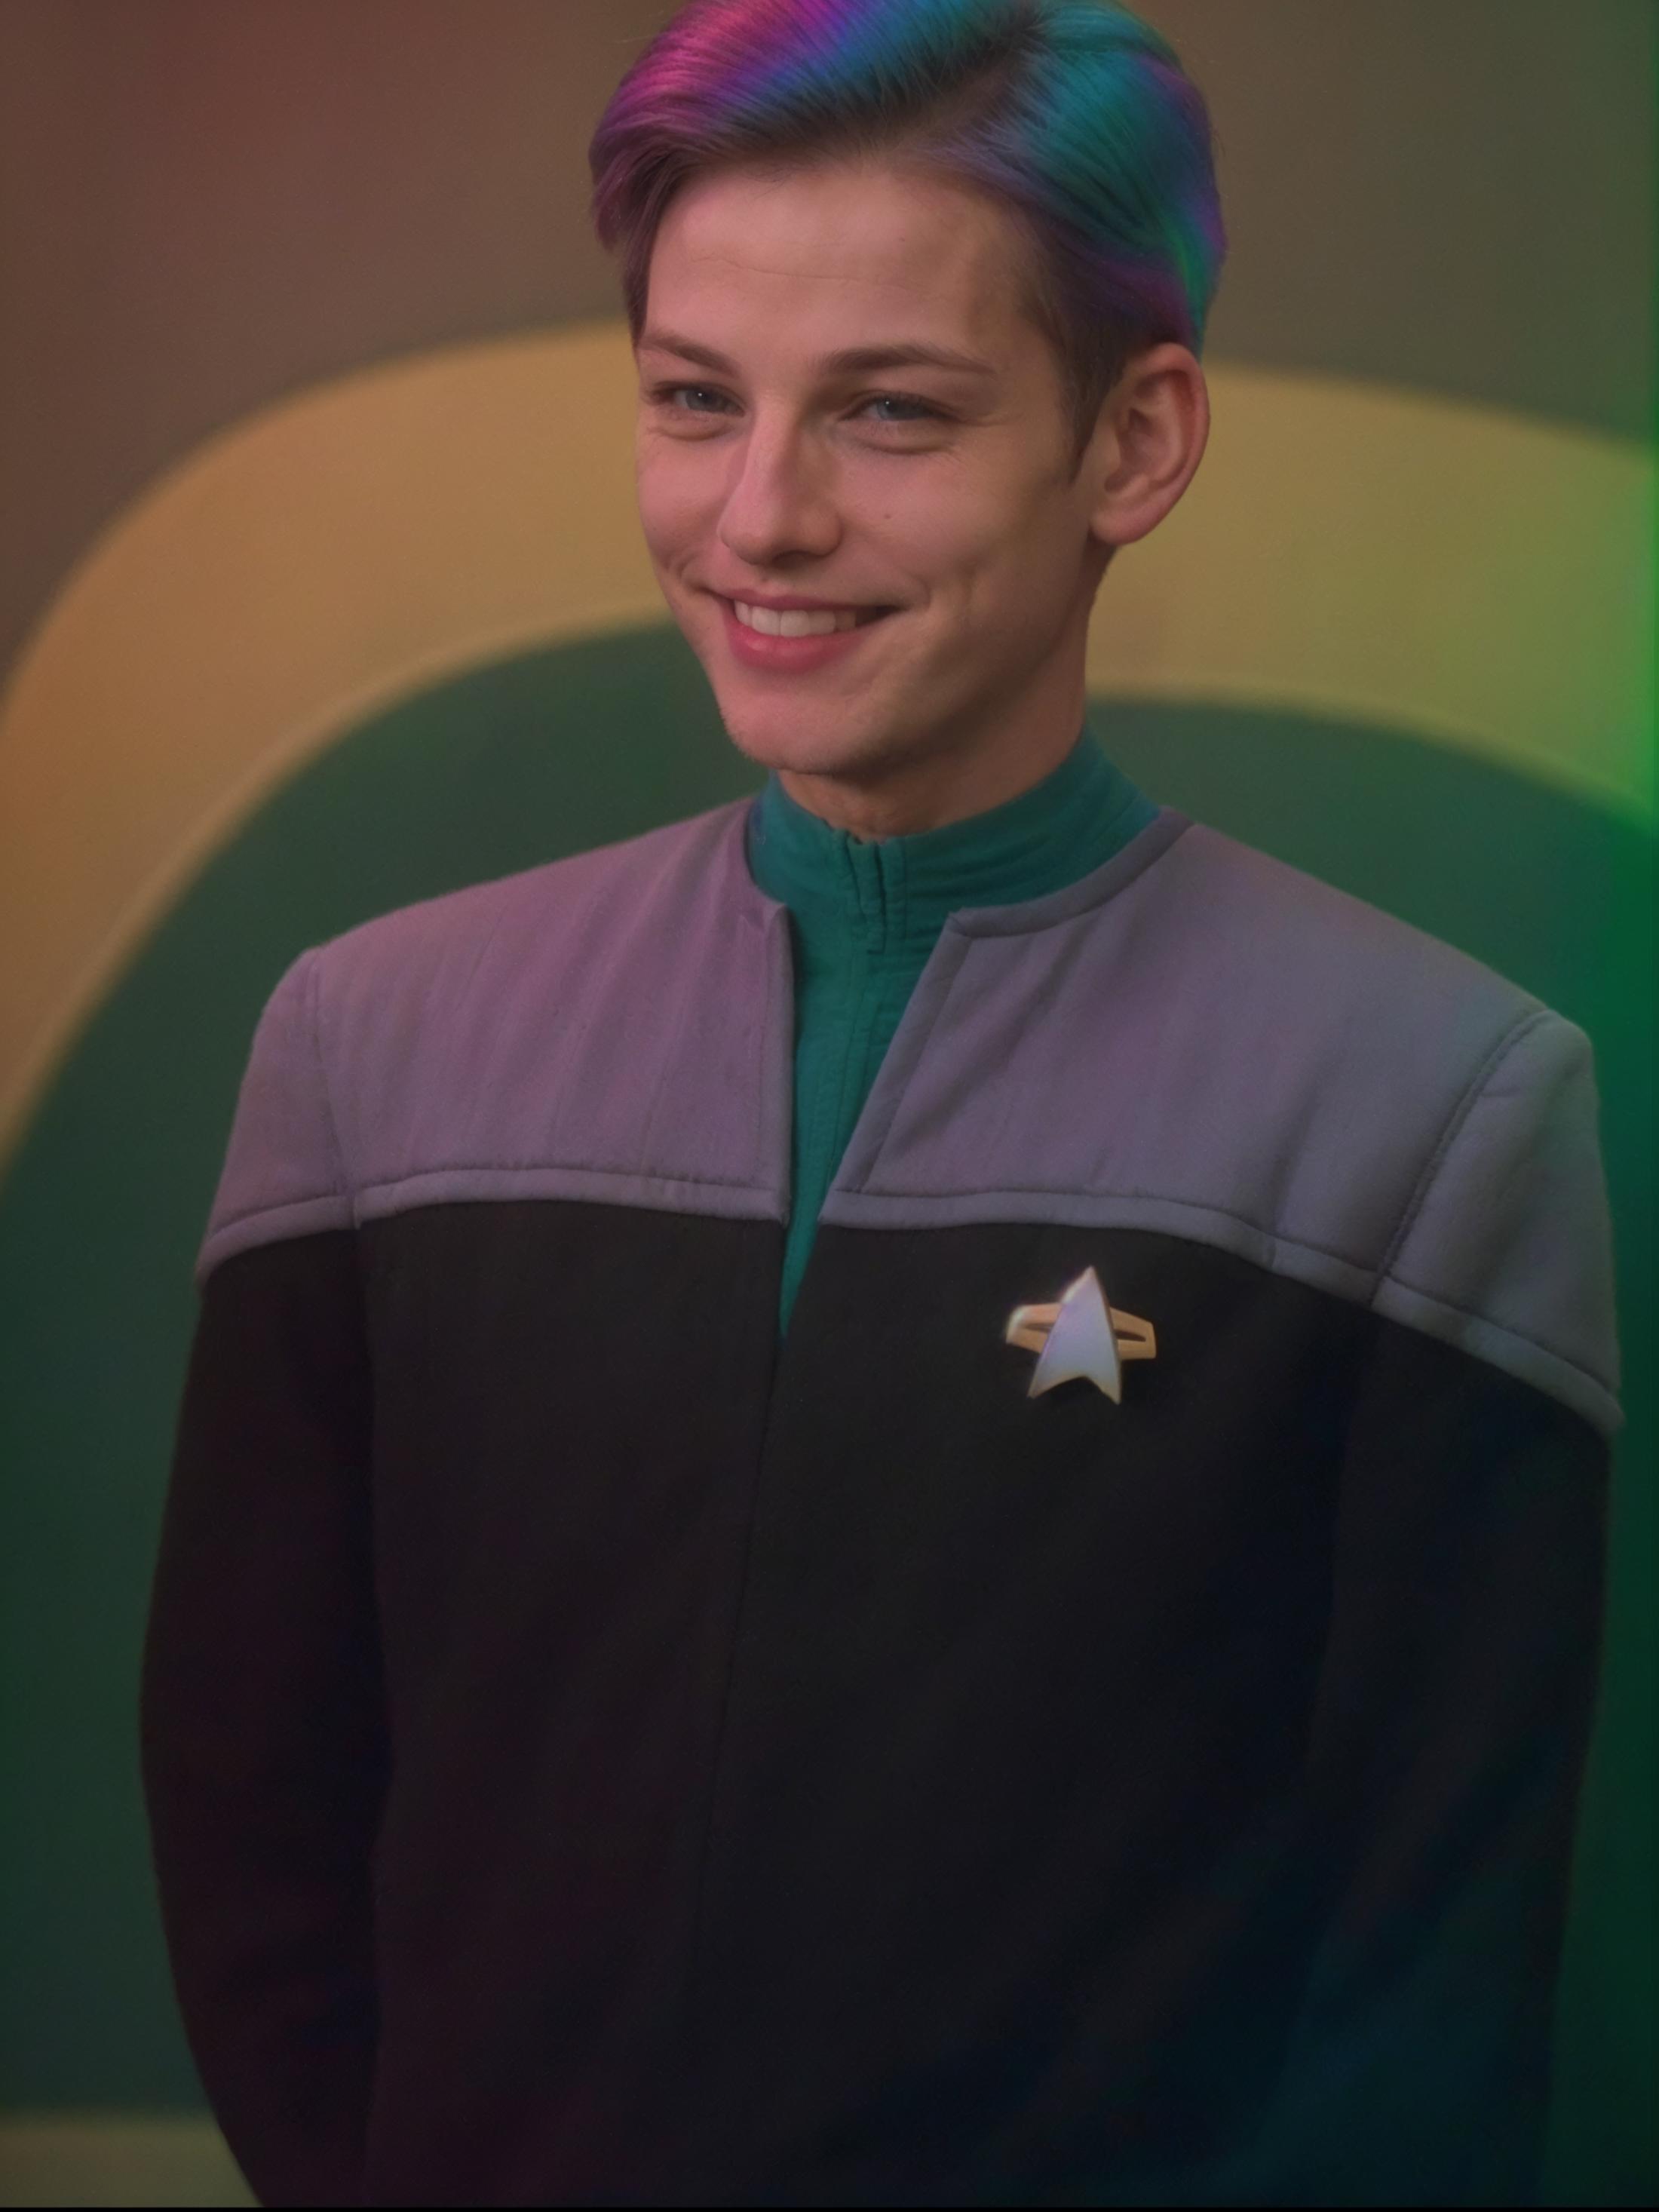 Smiling Star Trek Actor with Purple Hair and Green Shirt.